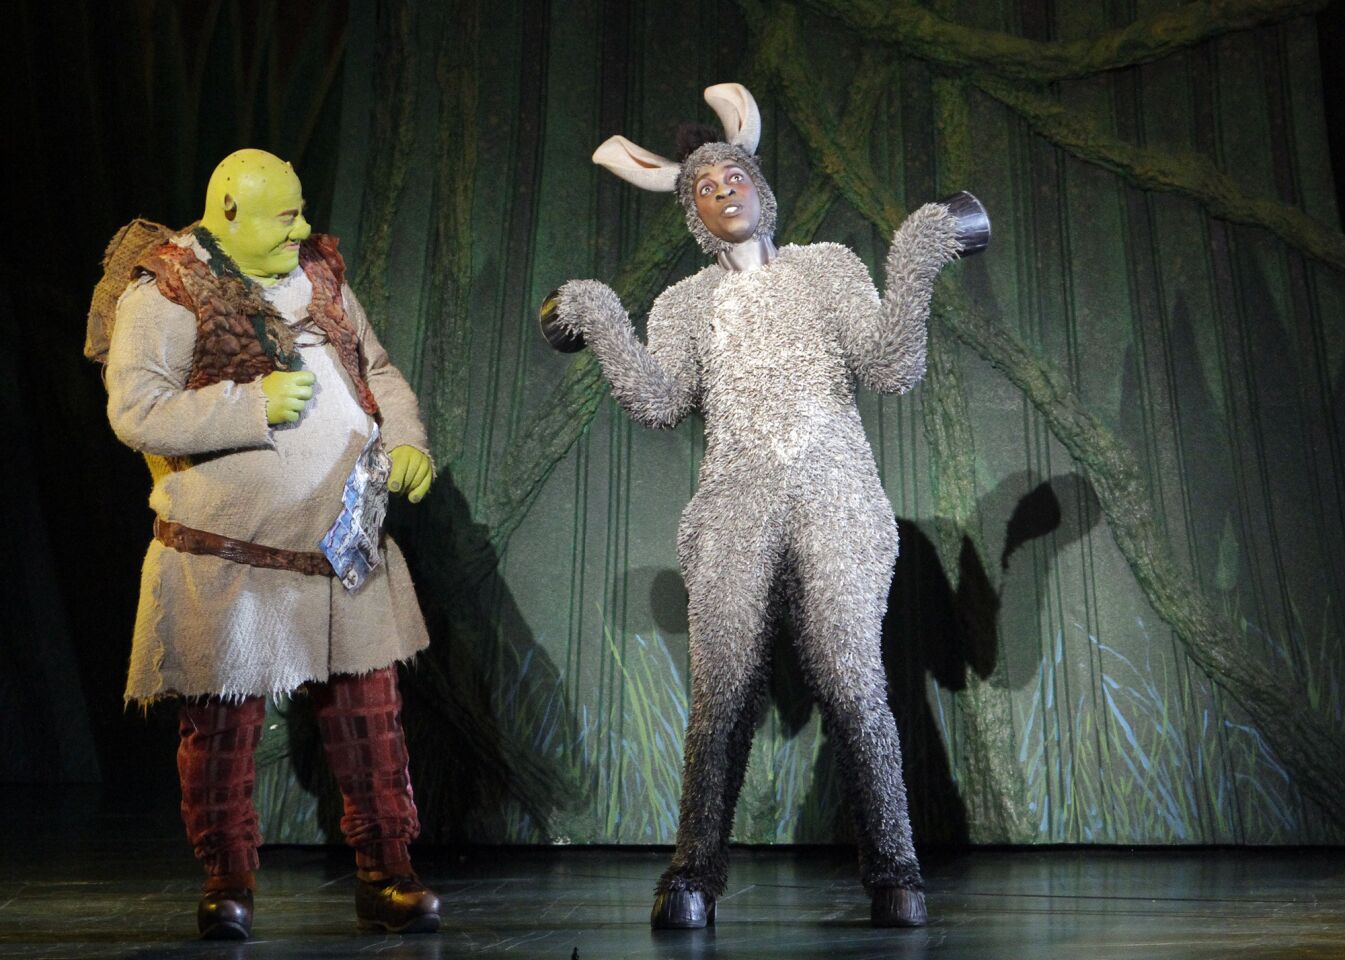 "Shrek" puts a grumpy ogre spin on the classic fairy-tale formula of a charming prince who travels with his noble steed to rescue a princess and break her curse with true love's kiss. The first DreamWorks film to be adapted as a stage musical, "Shrek" ran on Broadway from 2008 to 2010.